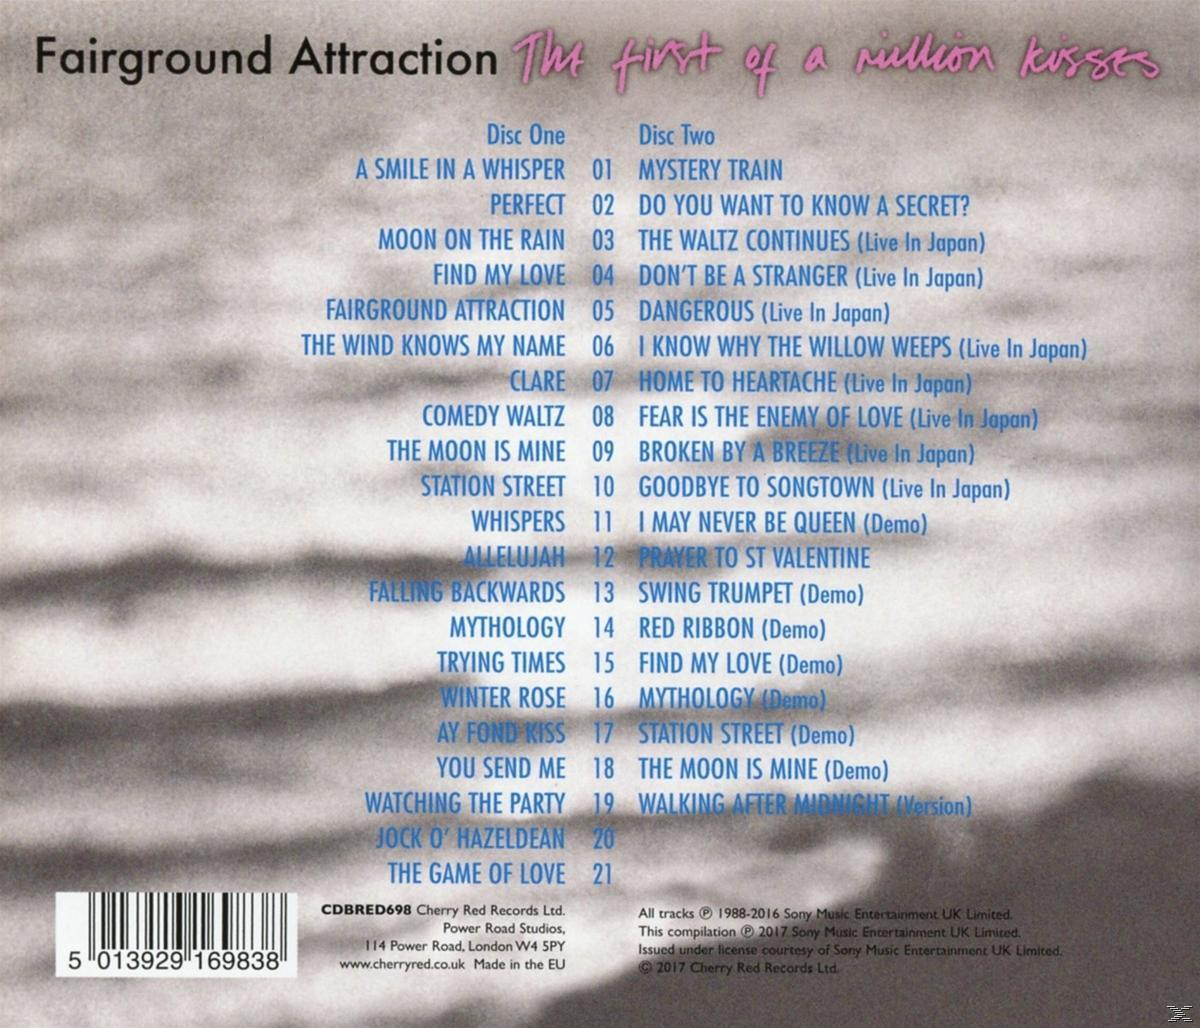 Of B-Sides,Demos First - Million - A Fairground The Kisses-plus (CD) Attraction